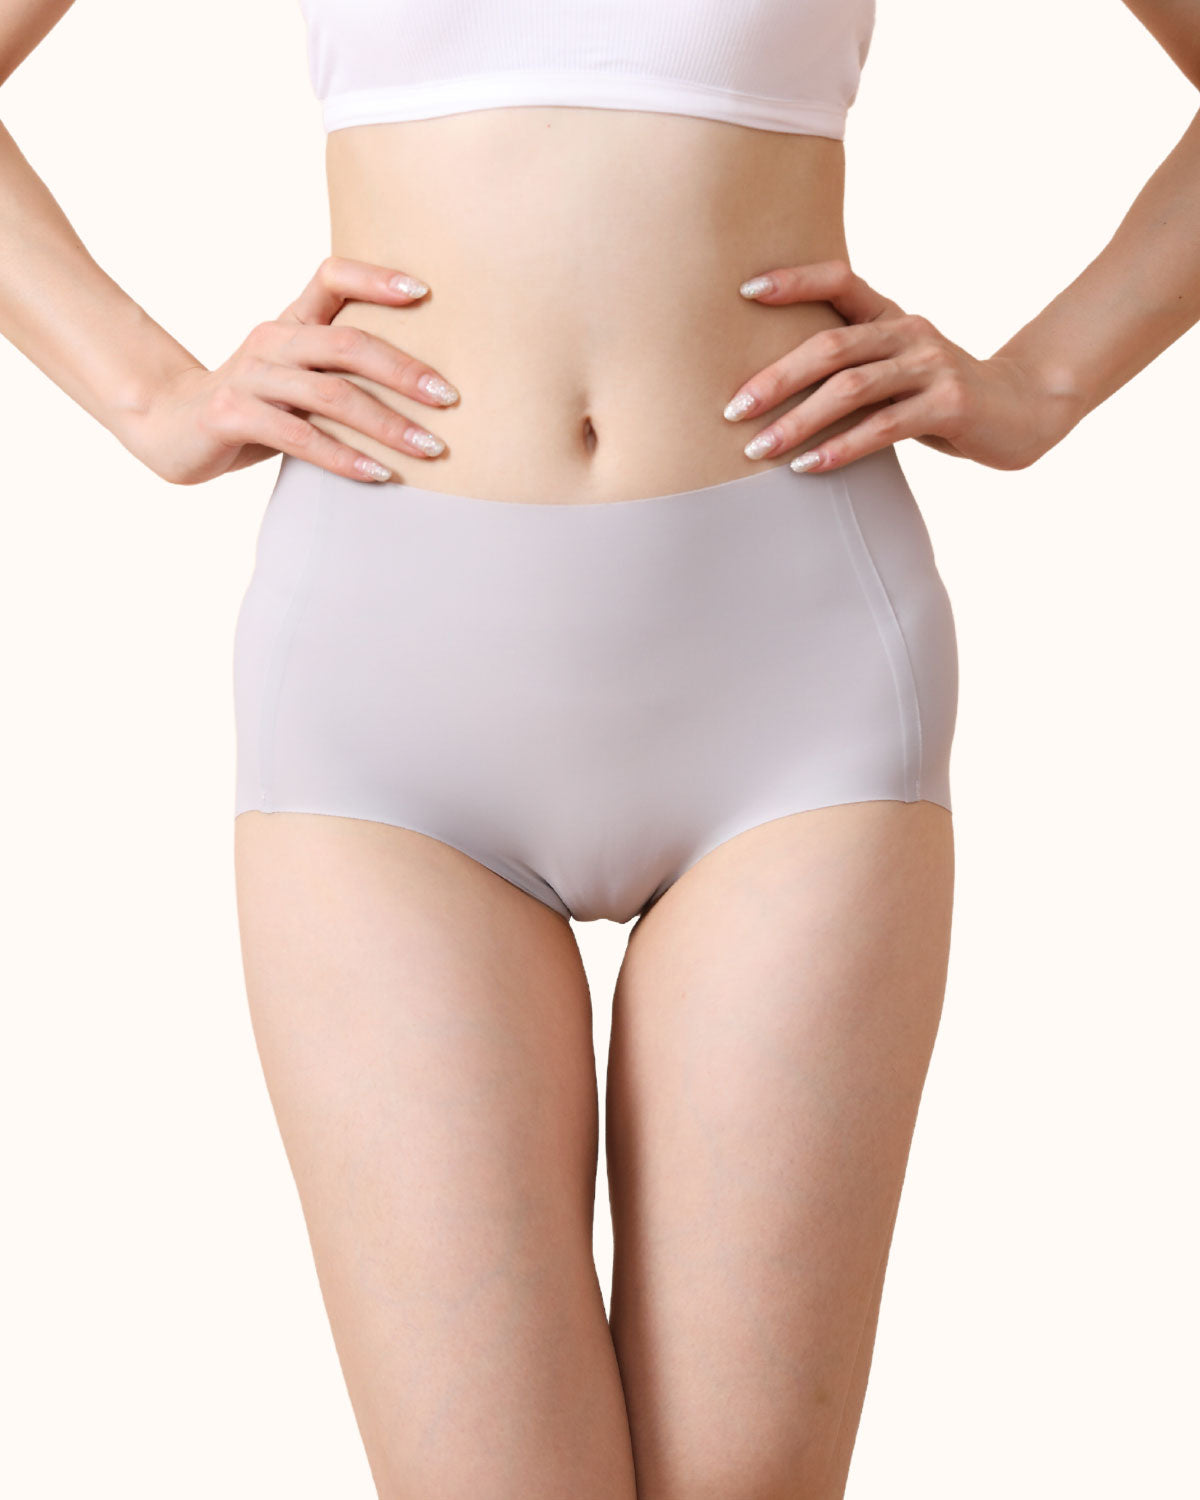 Style 1865 High Waist Invisible Panties Whole Carton (M Size, 230 Pcs of Each Color Pink/Grey/Black, 690Pcs in Total)